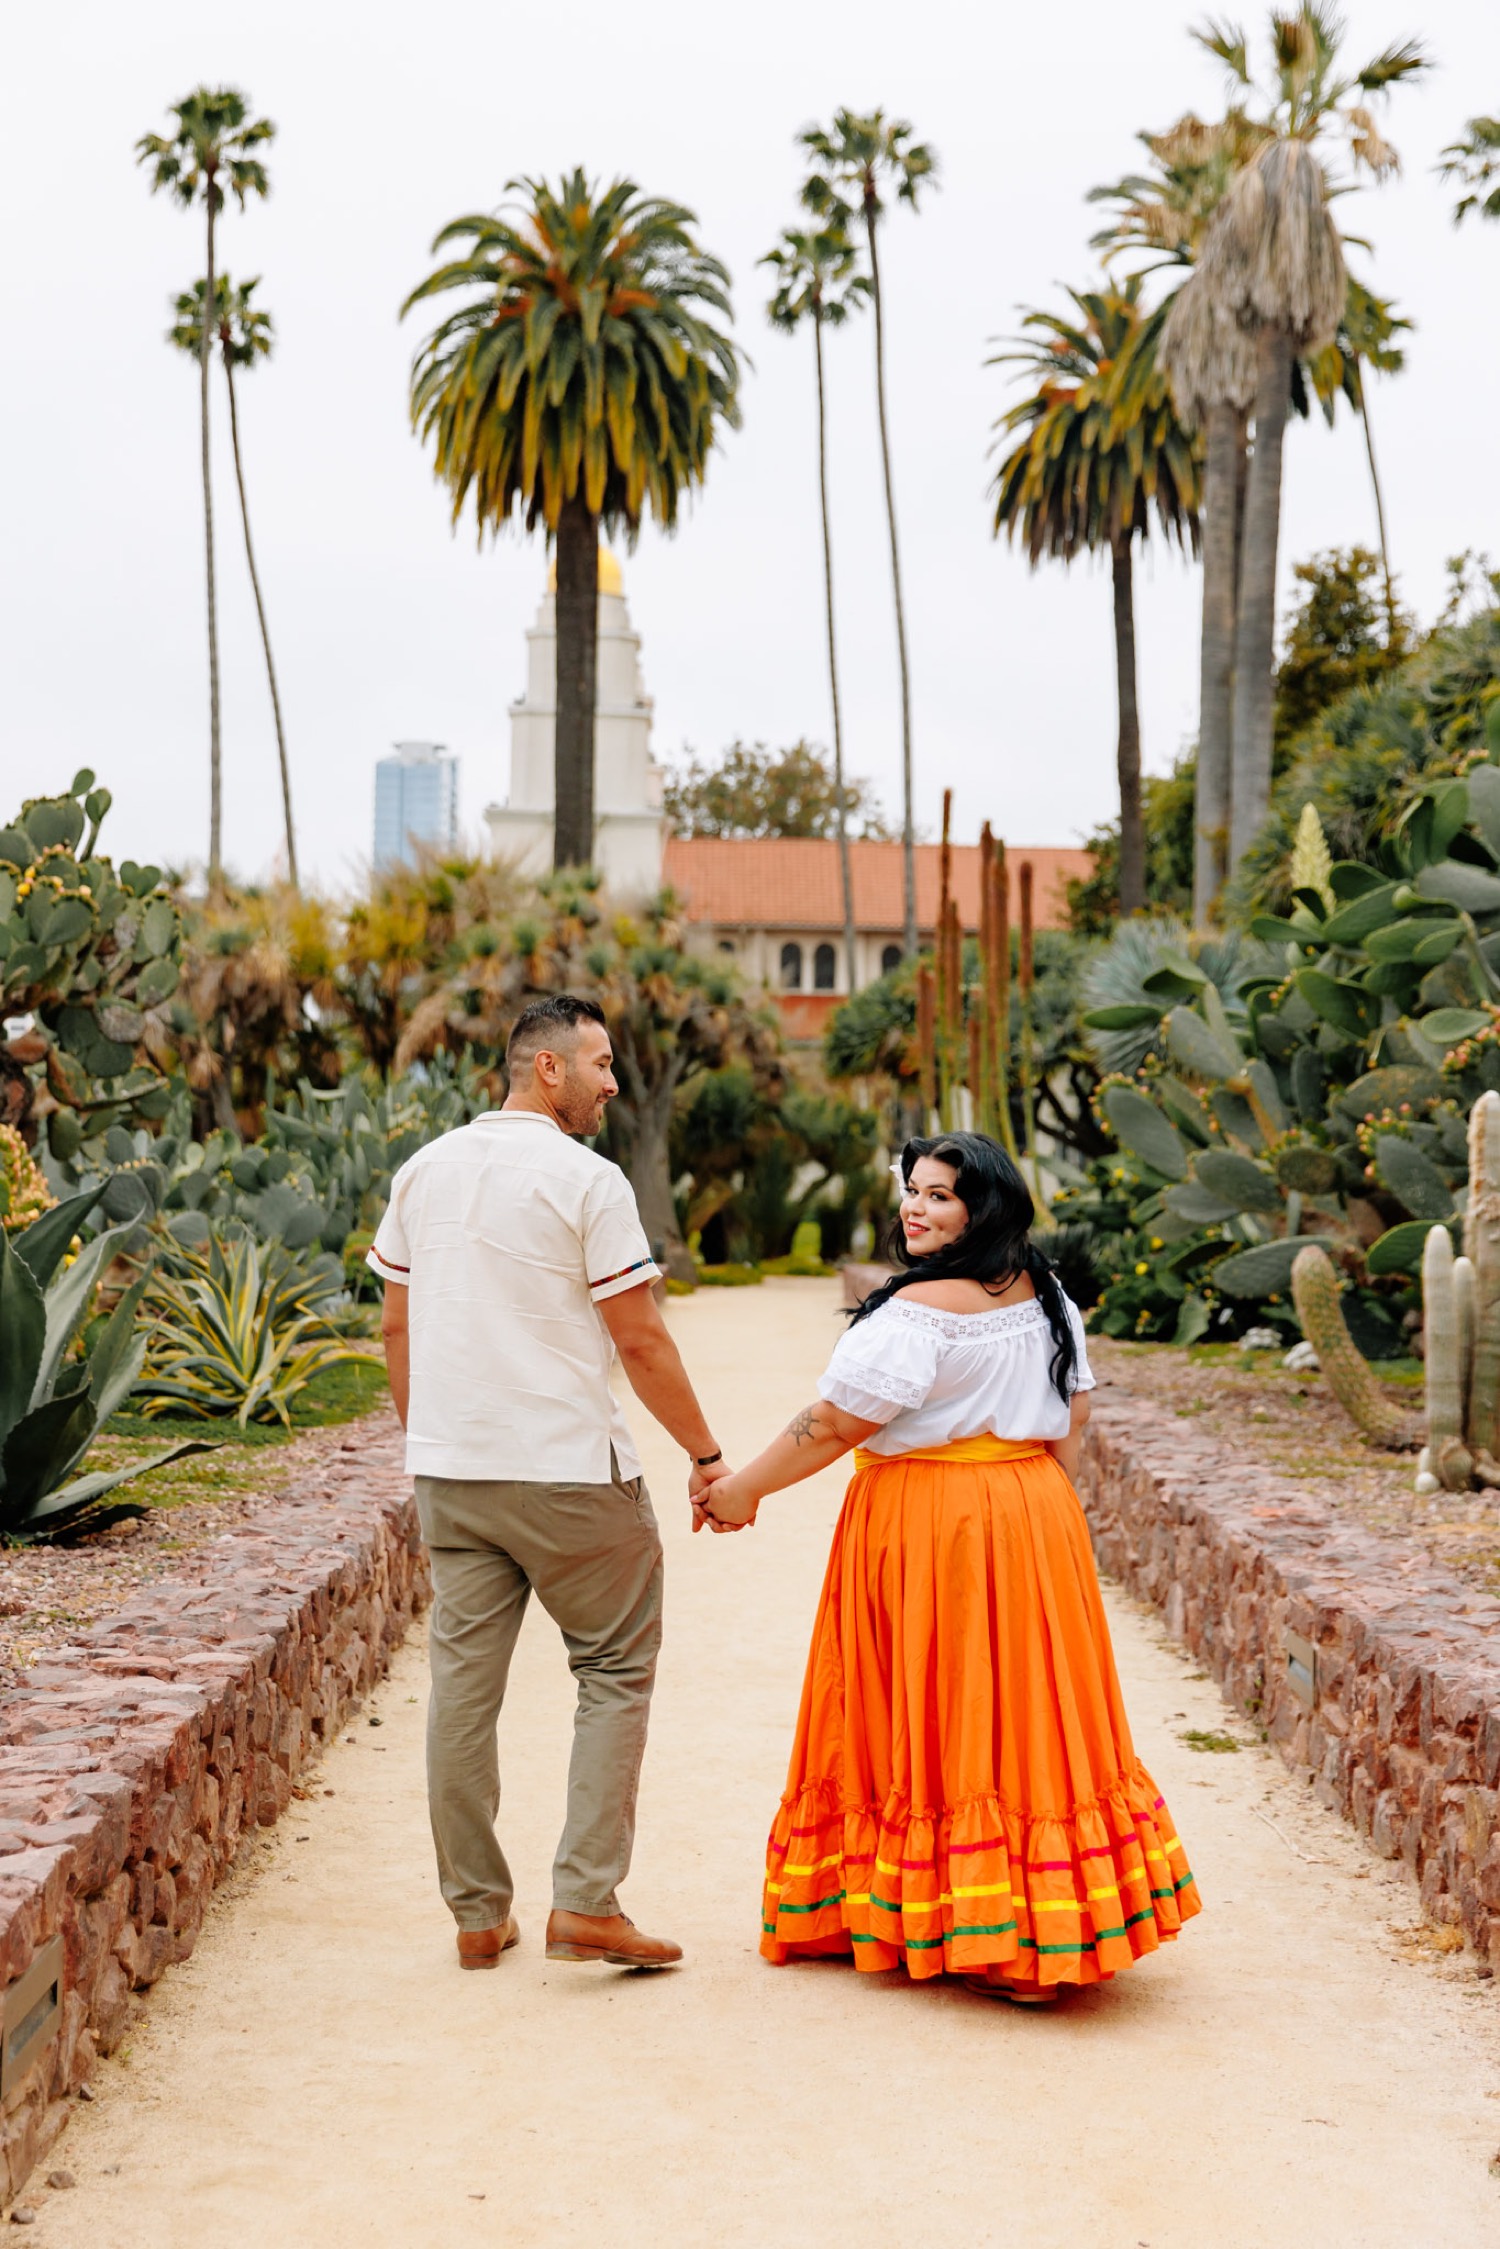 Beverly Hills engagement photos by Magaly Barajas Photography